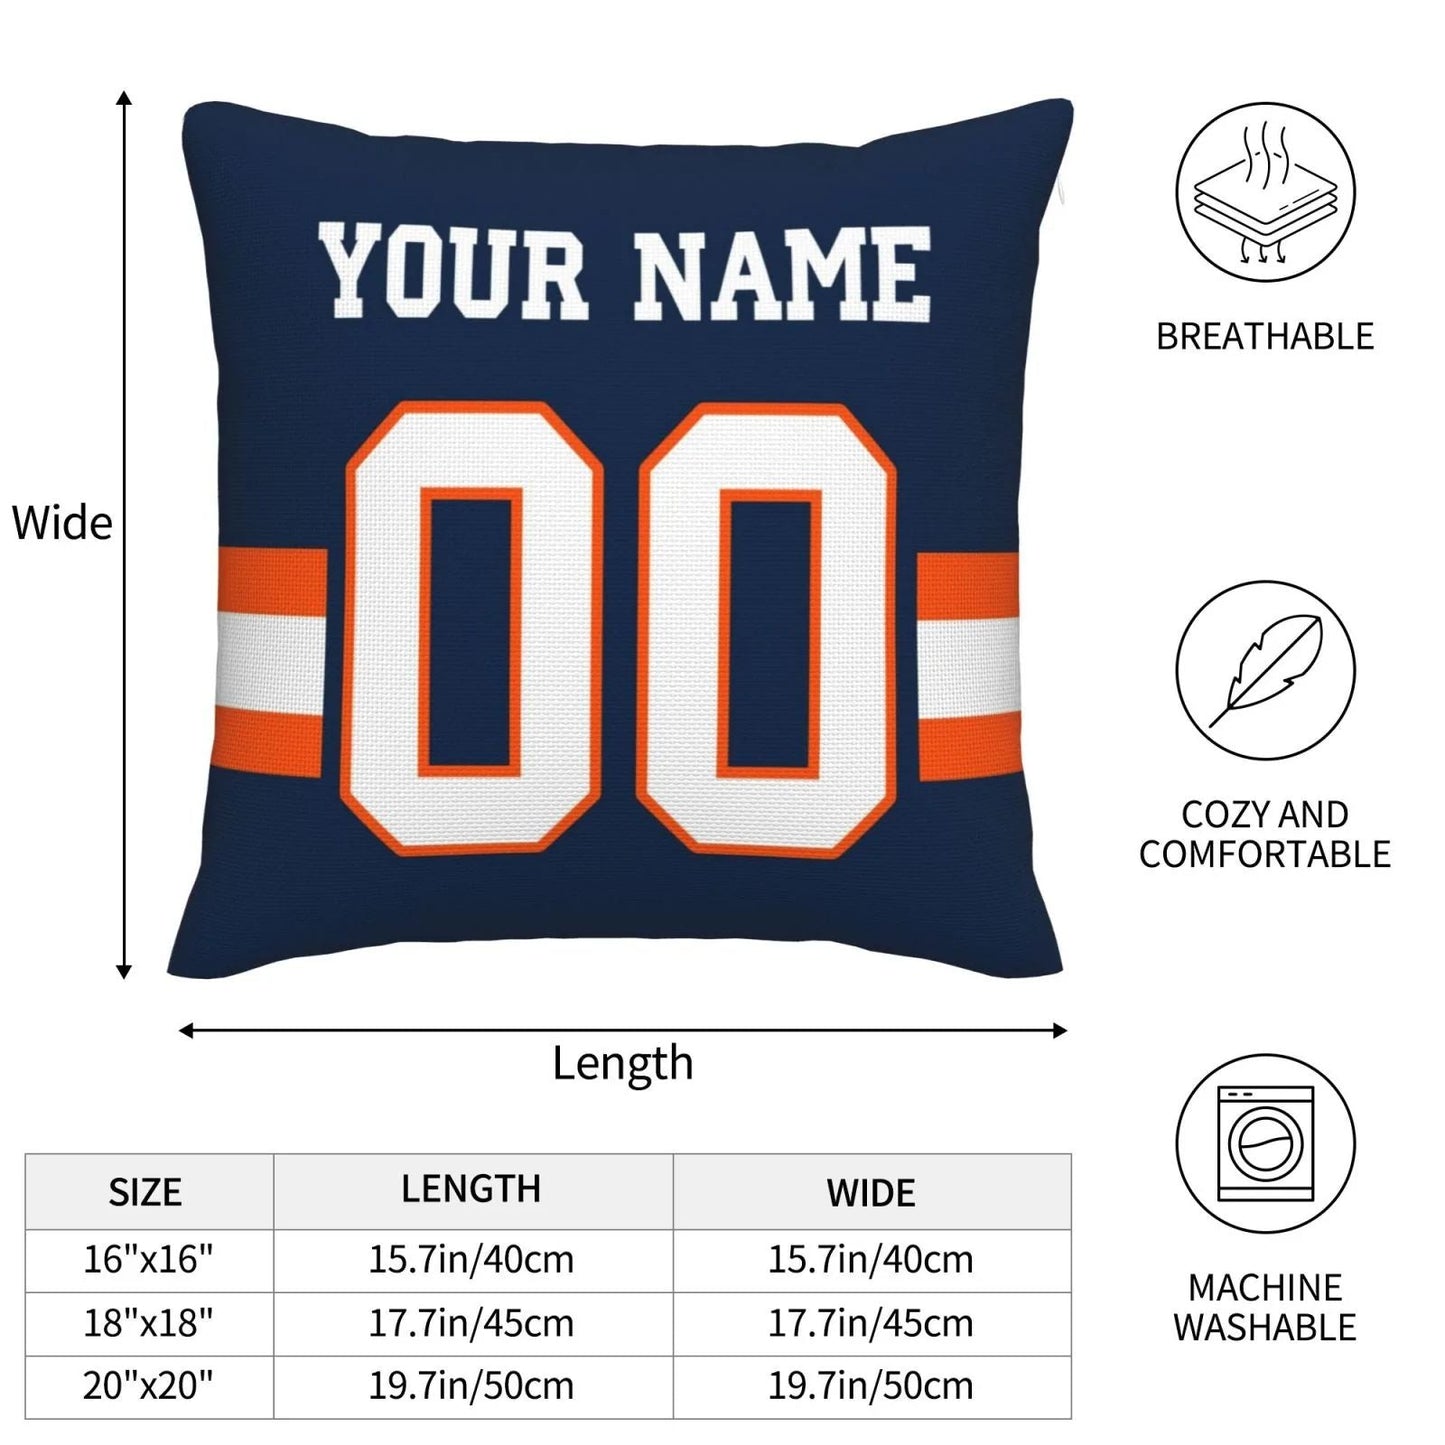 Custom D.Broncos Pillow Decorative Throw Pillow Case - Print Personalized Football Team Fans Name & Number Birthday Gift Football Pillows